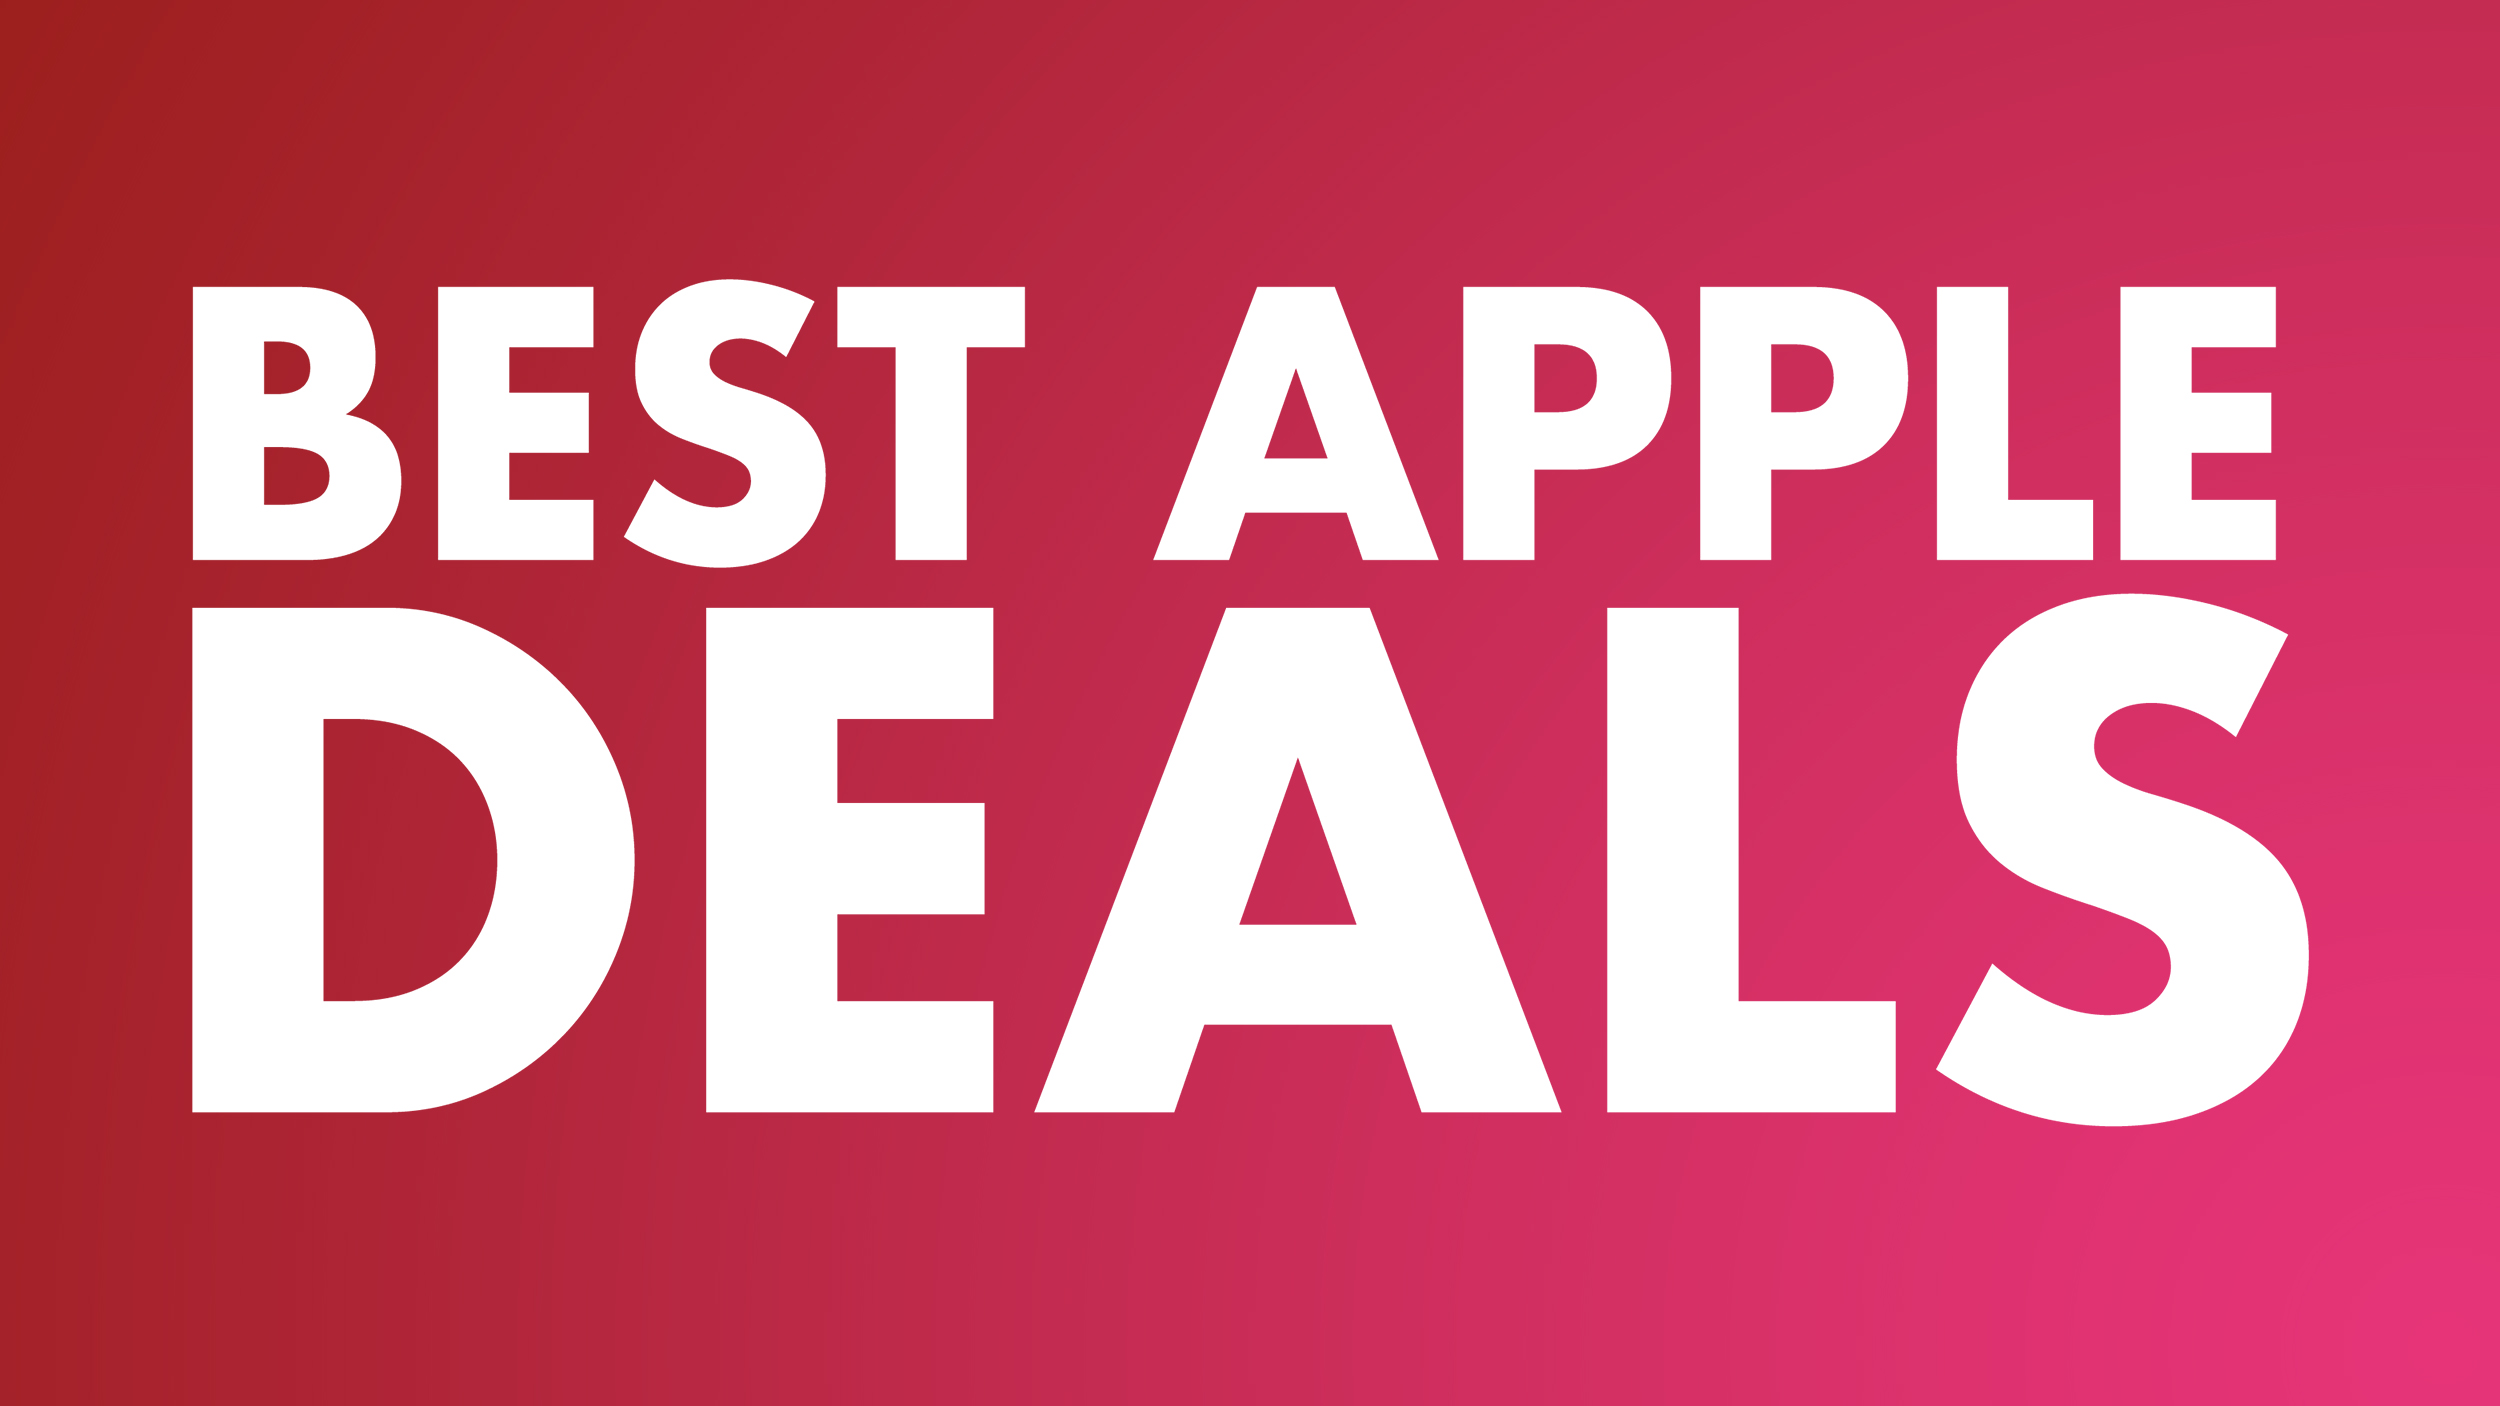 Best Apple Deals of the Week: Amazon’s Sale Brings Early Holiday Prices on Apple TV 4K, AirPods, More